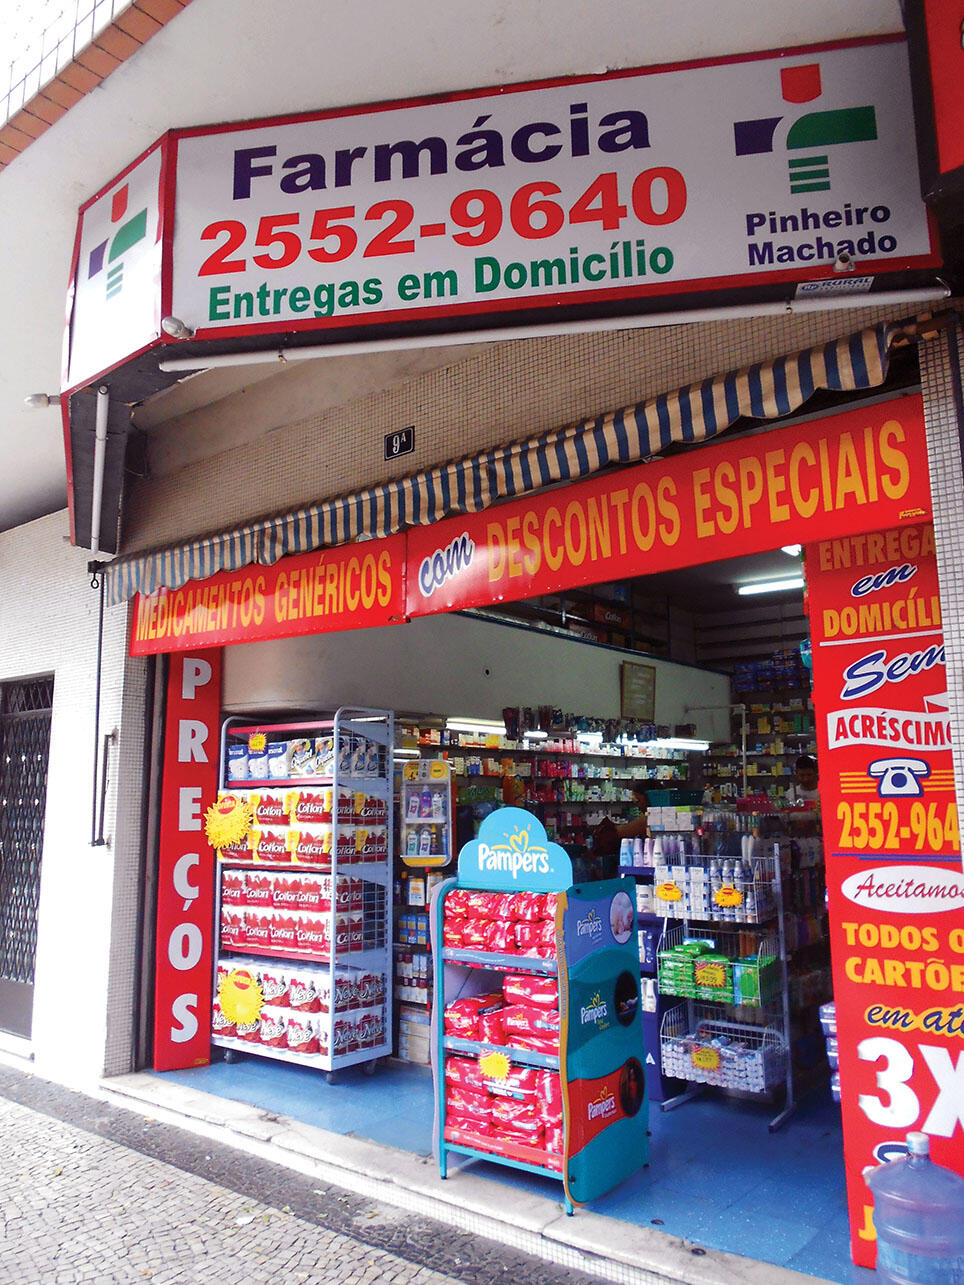 In 2012, a pharmacy in Rio de Janeiro, Brazil, advertises special discounts on generic drugs. (Photo by Eduardo Pazos/Wikimedia Commons.)